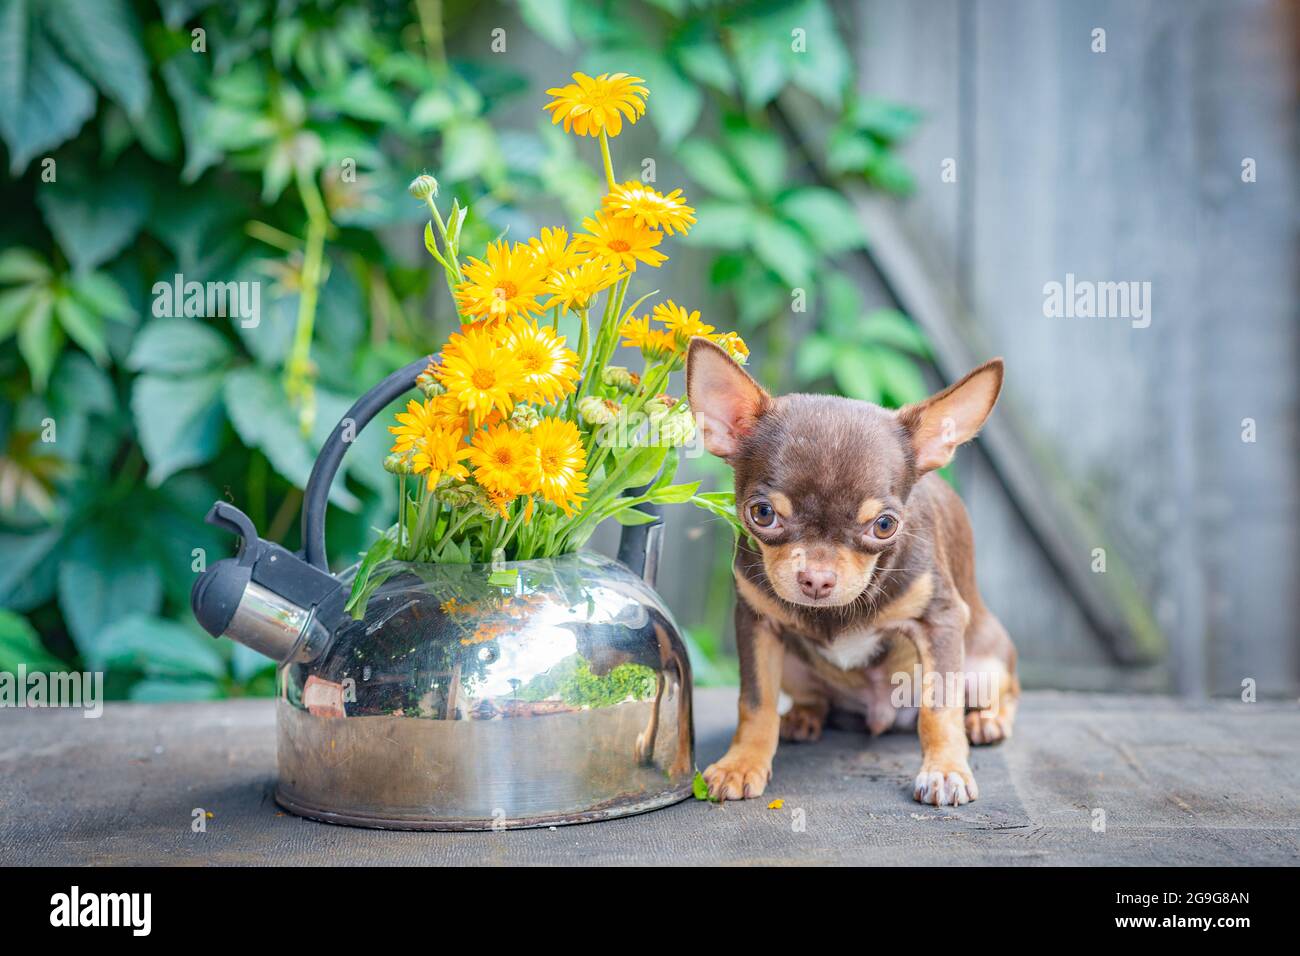 A brown Chihuahua puppy sits, head up, on a wooden table near a kettle of calendula Stock Photo